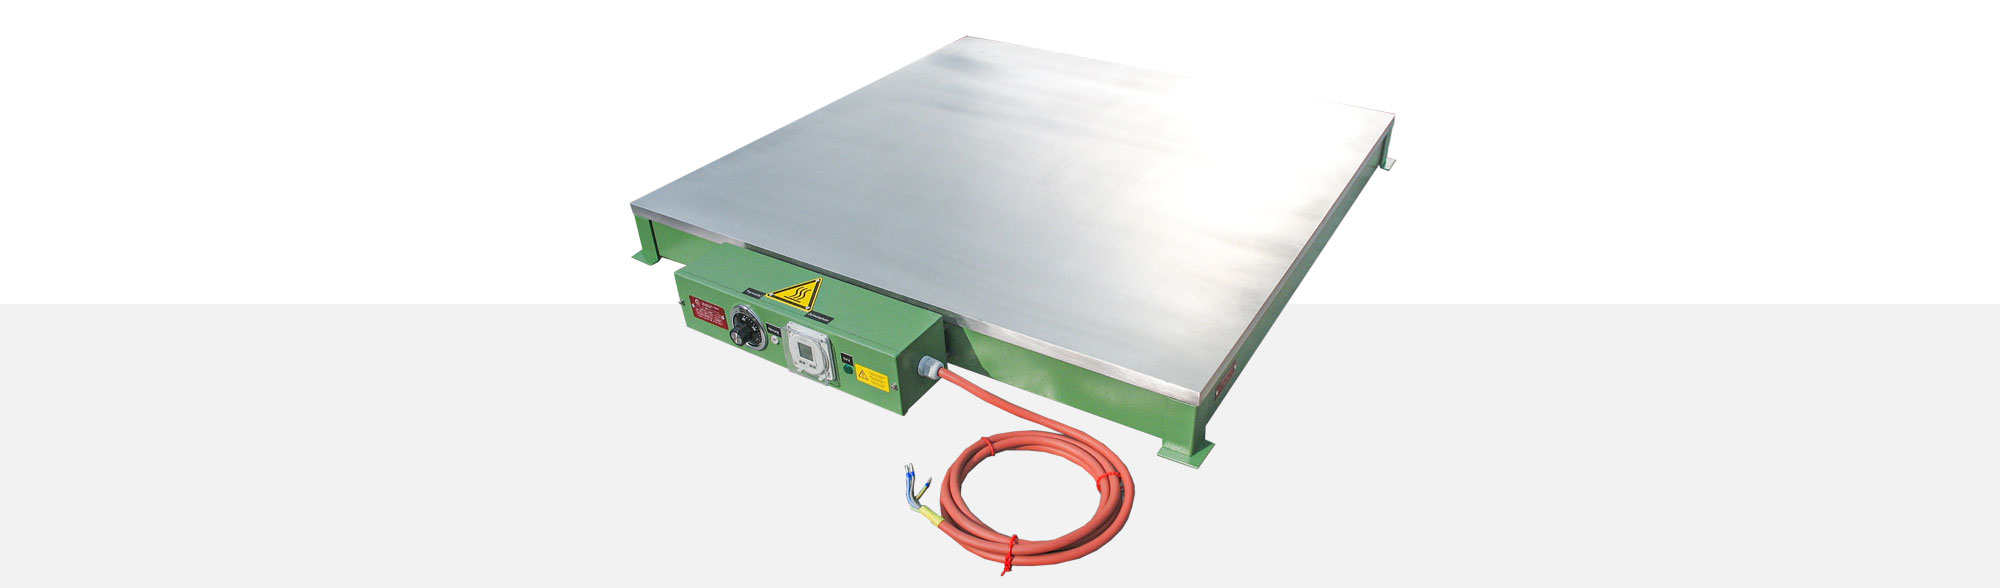 Heating Plates are suitable for wax heating as well as heating of coil bodies and metallic moulds. Designs with covers avoid heat loos and improve the temperature distribution of the Heating Plate.